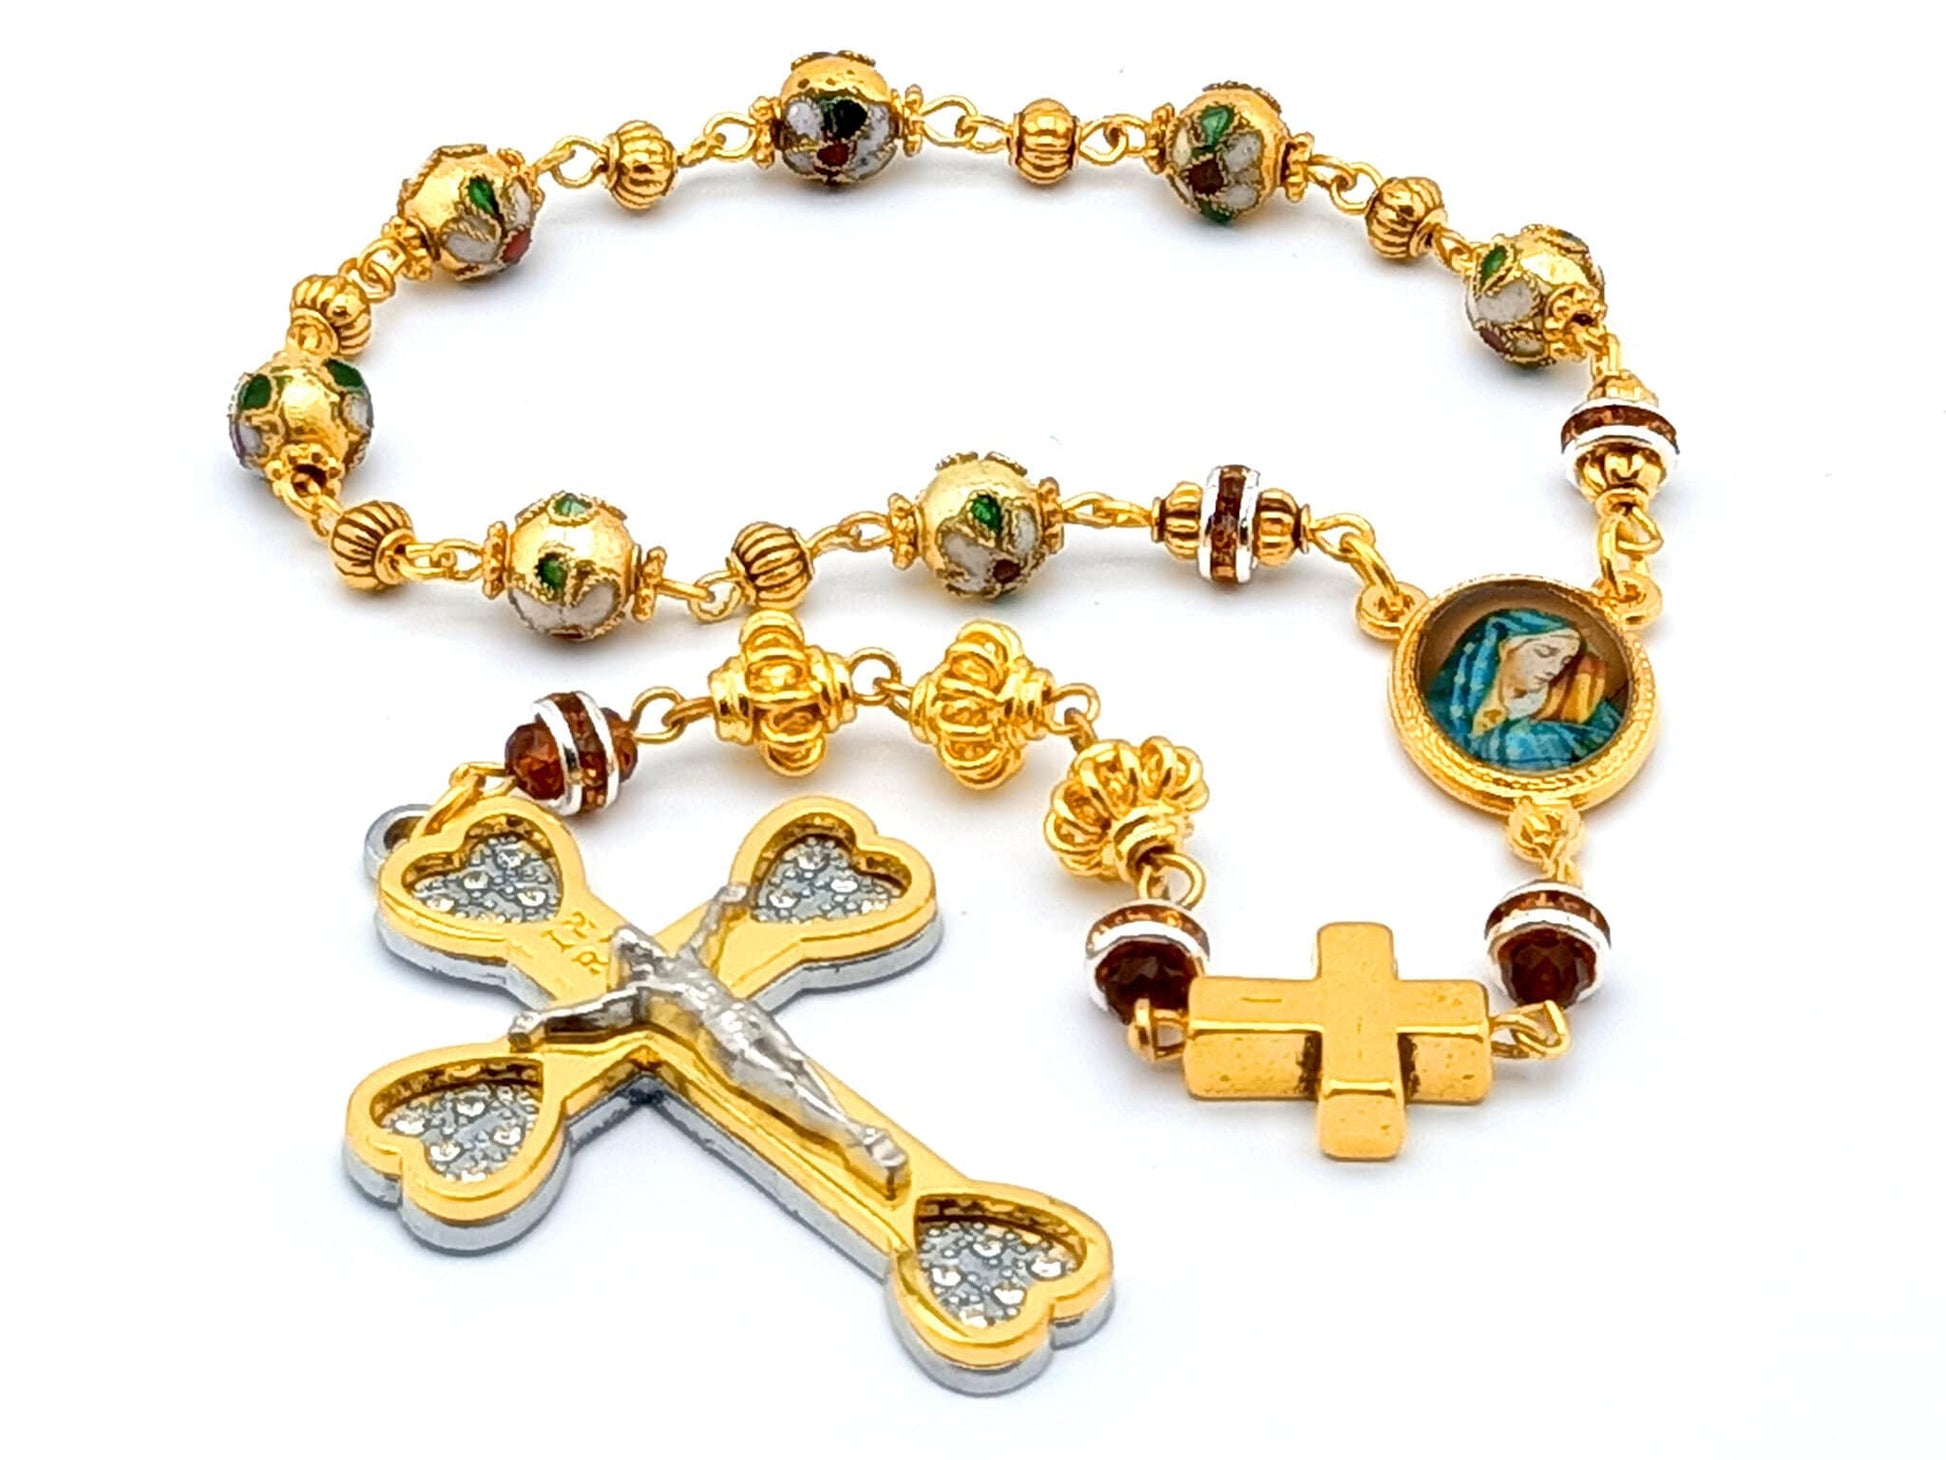 Our Lady of Sorrows unique rosary beads dolor rosary prayer chaplet with gold floral cloisonne beads, golden diamonte crucifix and picture centre medal.